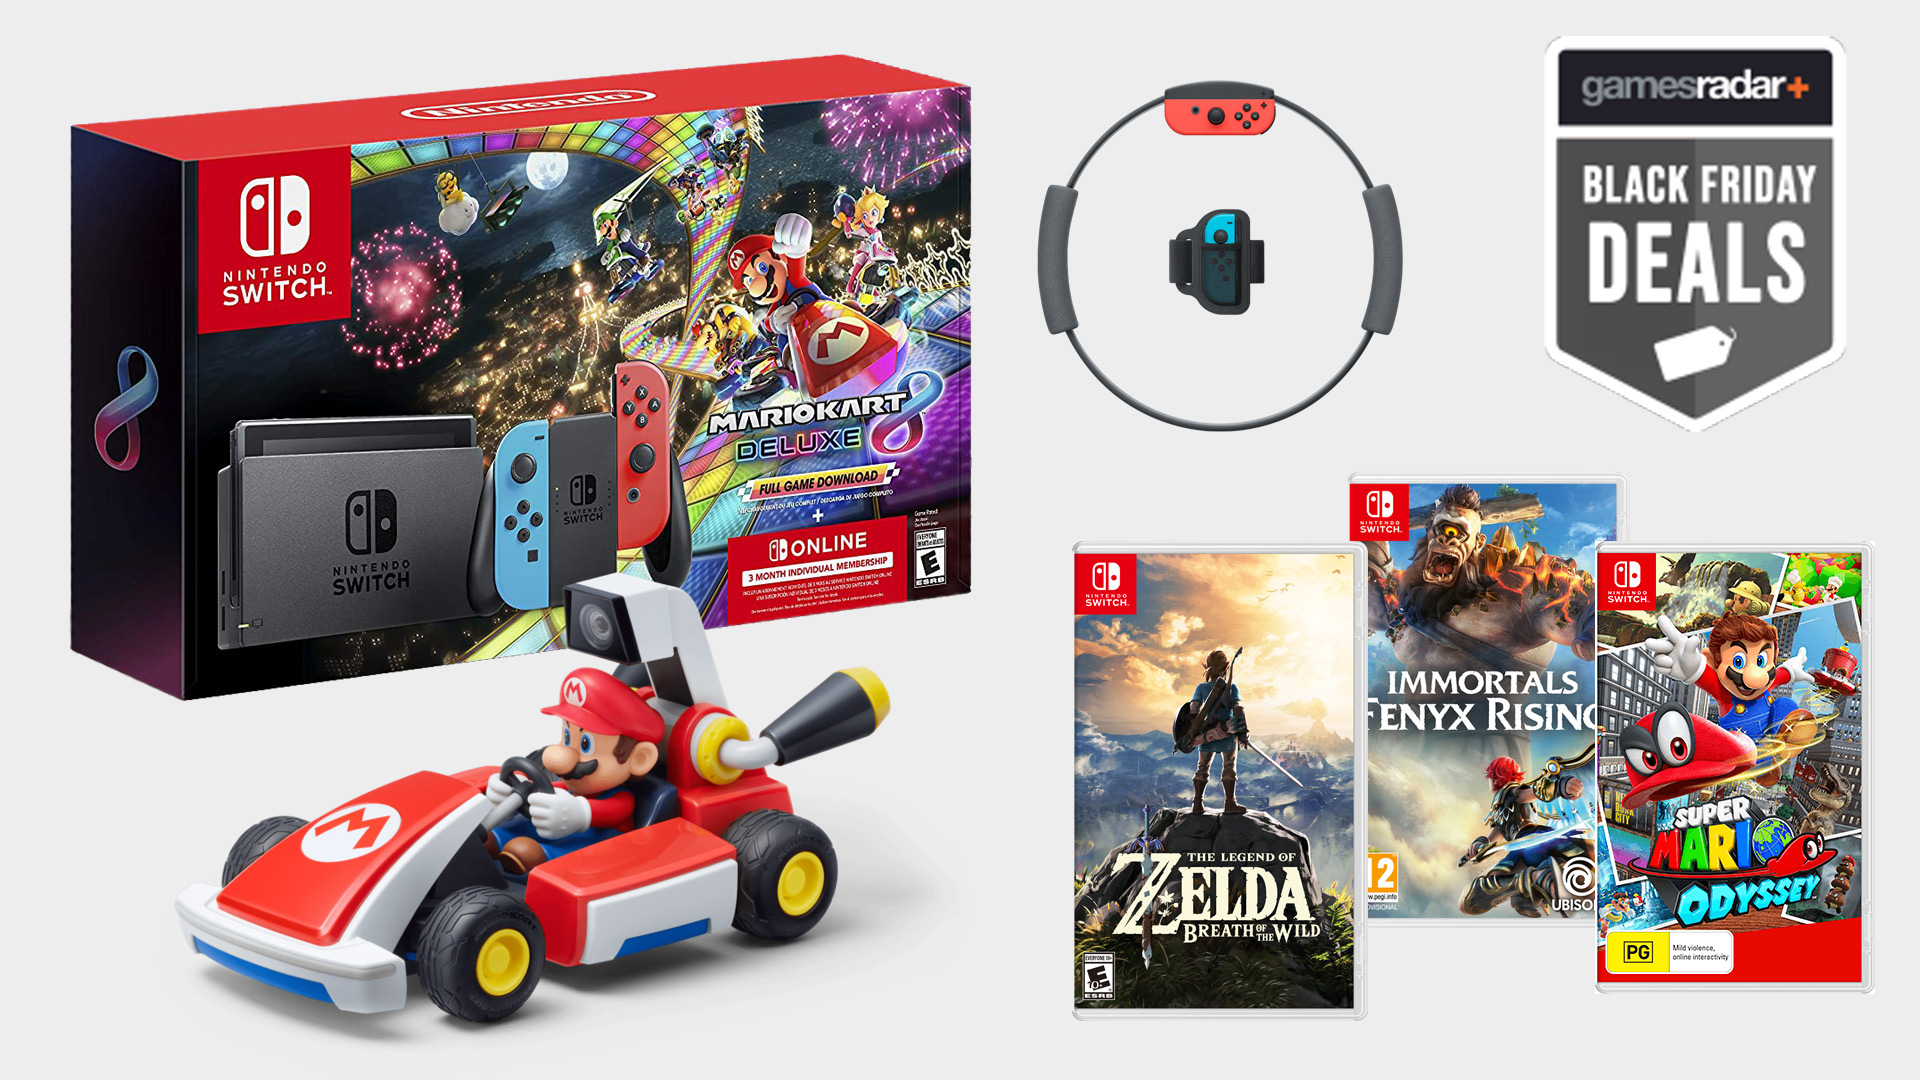 Black Friday Nintendo Switch deals are here - Mario Kart 8 bundle now available and big on games | GamesRadar+